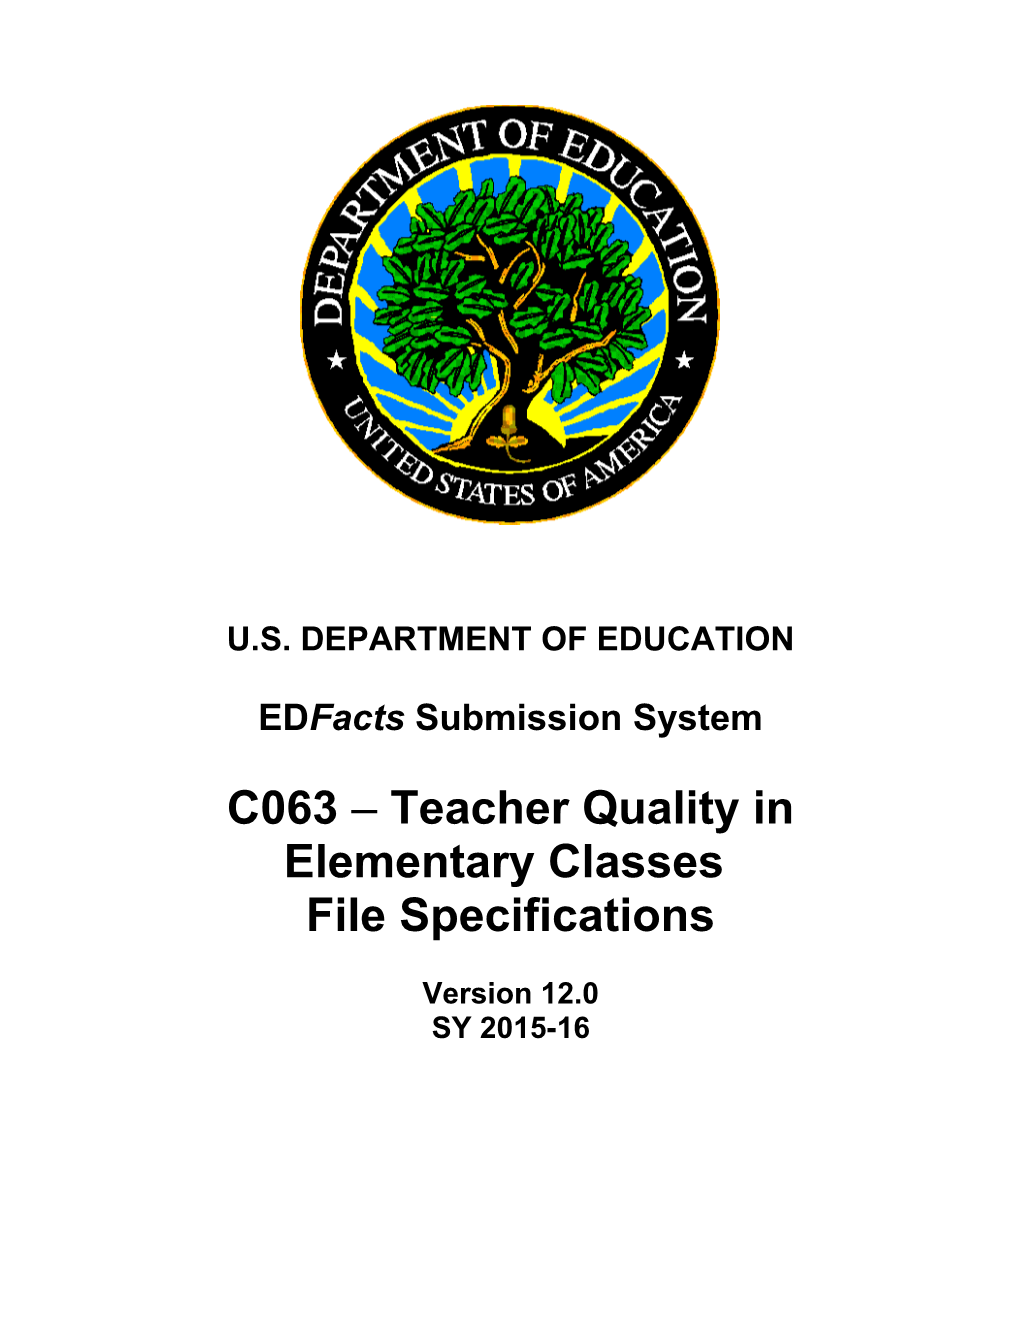 Teacher Quality in Elementary Classes File Specifications (Msword)